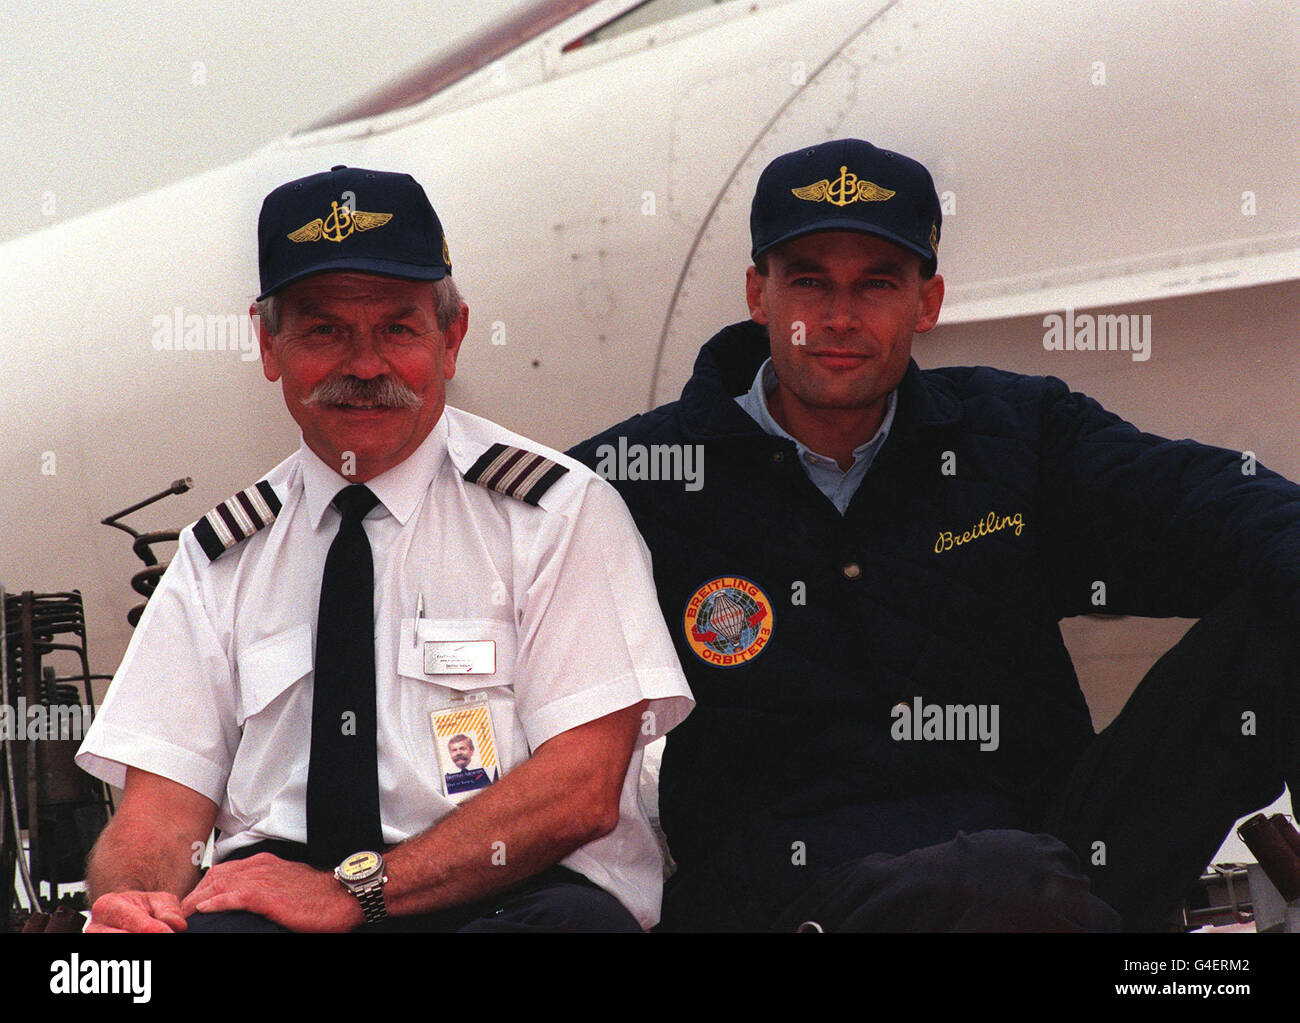 British Airways Concorde Flight Engineer Tony Brown (left) from Guildford, Surrey, with Bertrand Piccard at Heathrow Airport. Tony has been selected to pilot the Breitling Balloon with Bertrand on the next attempt to fly around the World in a Balloon. They hope to lift off sometime in November from the Swiss town of Chateau-d'Oex. Stock Photo